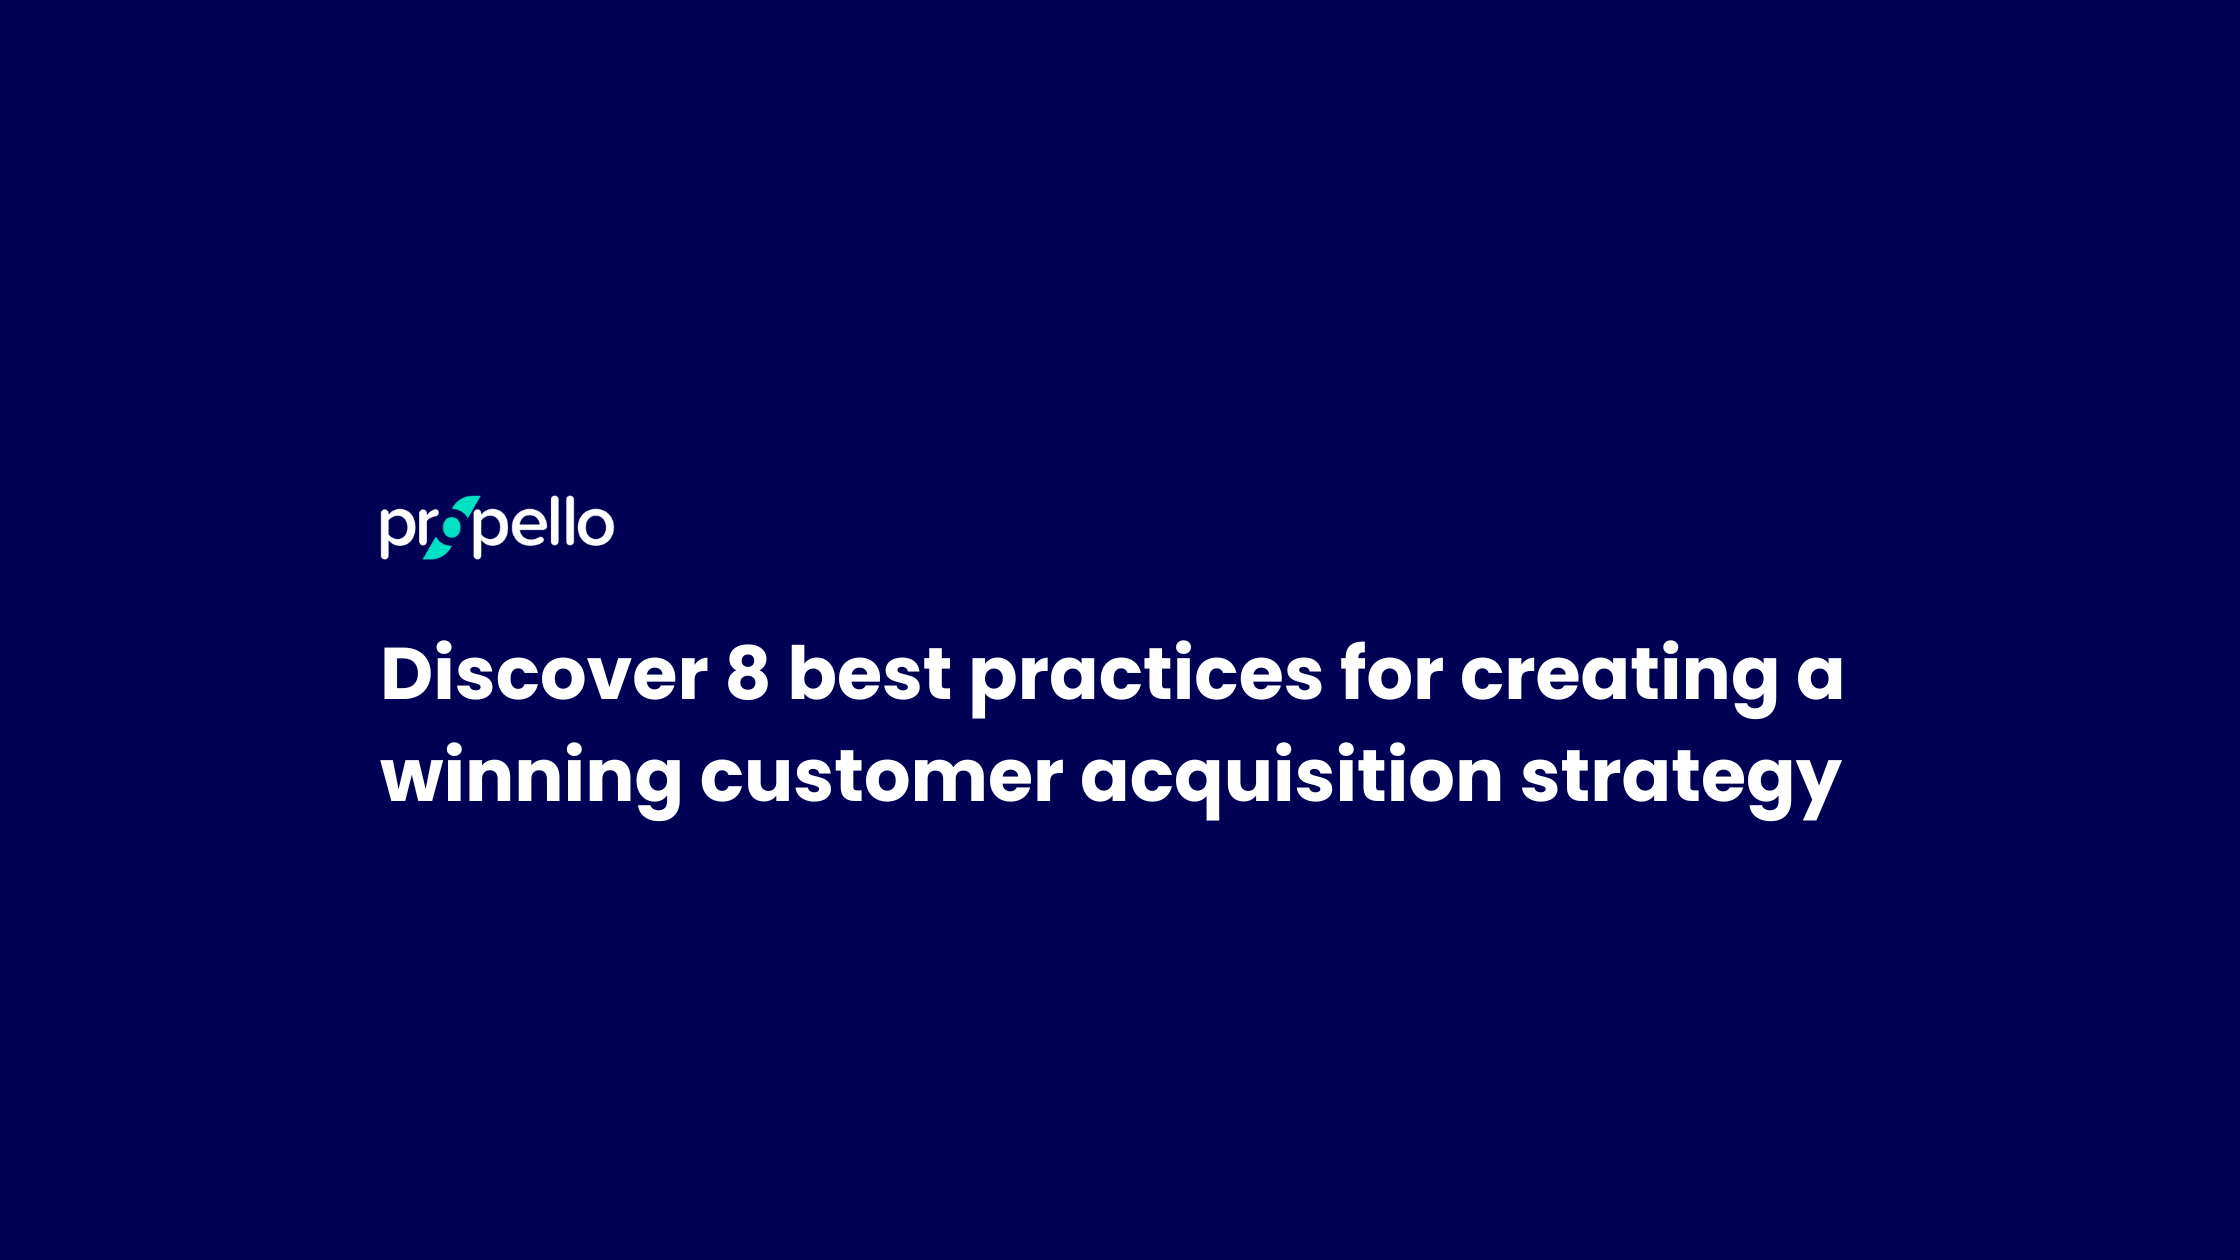 Customer Acquisition Strategy